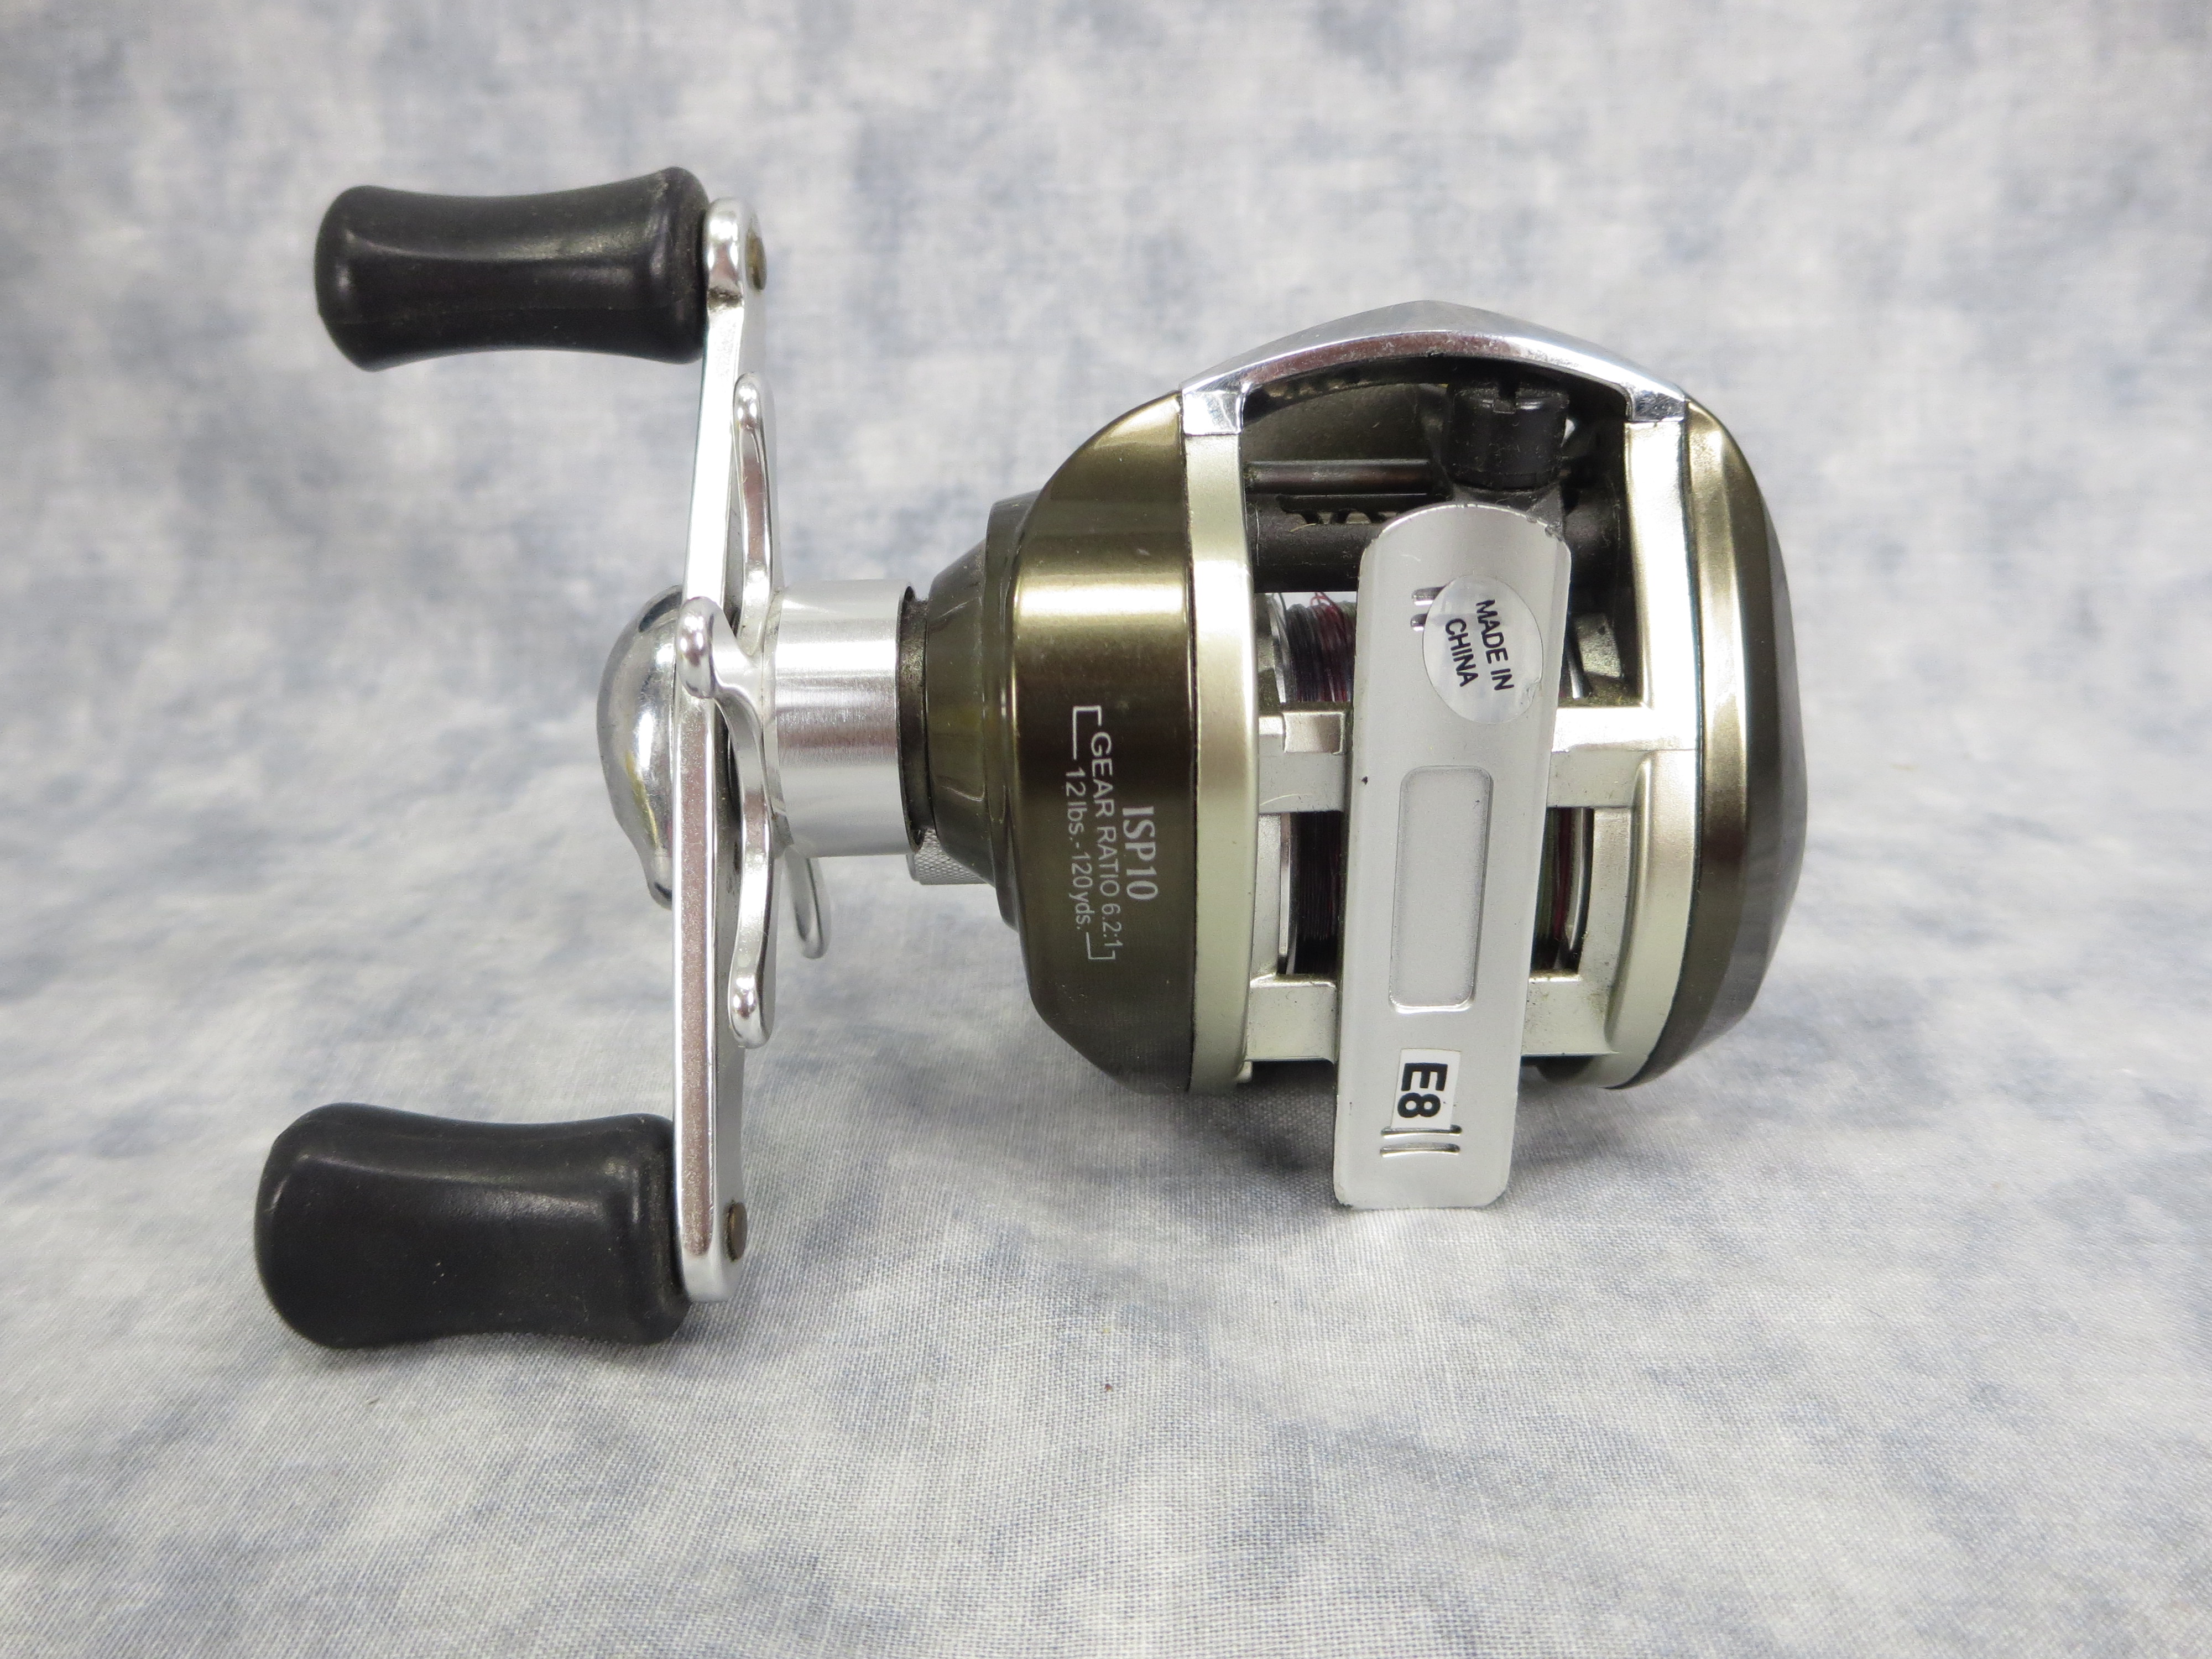 How much is PINNACLE Inertia Finesse Right-Hand Low-Profile 6.2:1 Baitcasting  Reel worth?